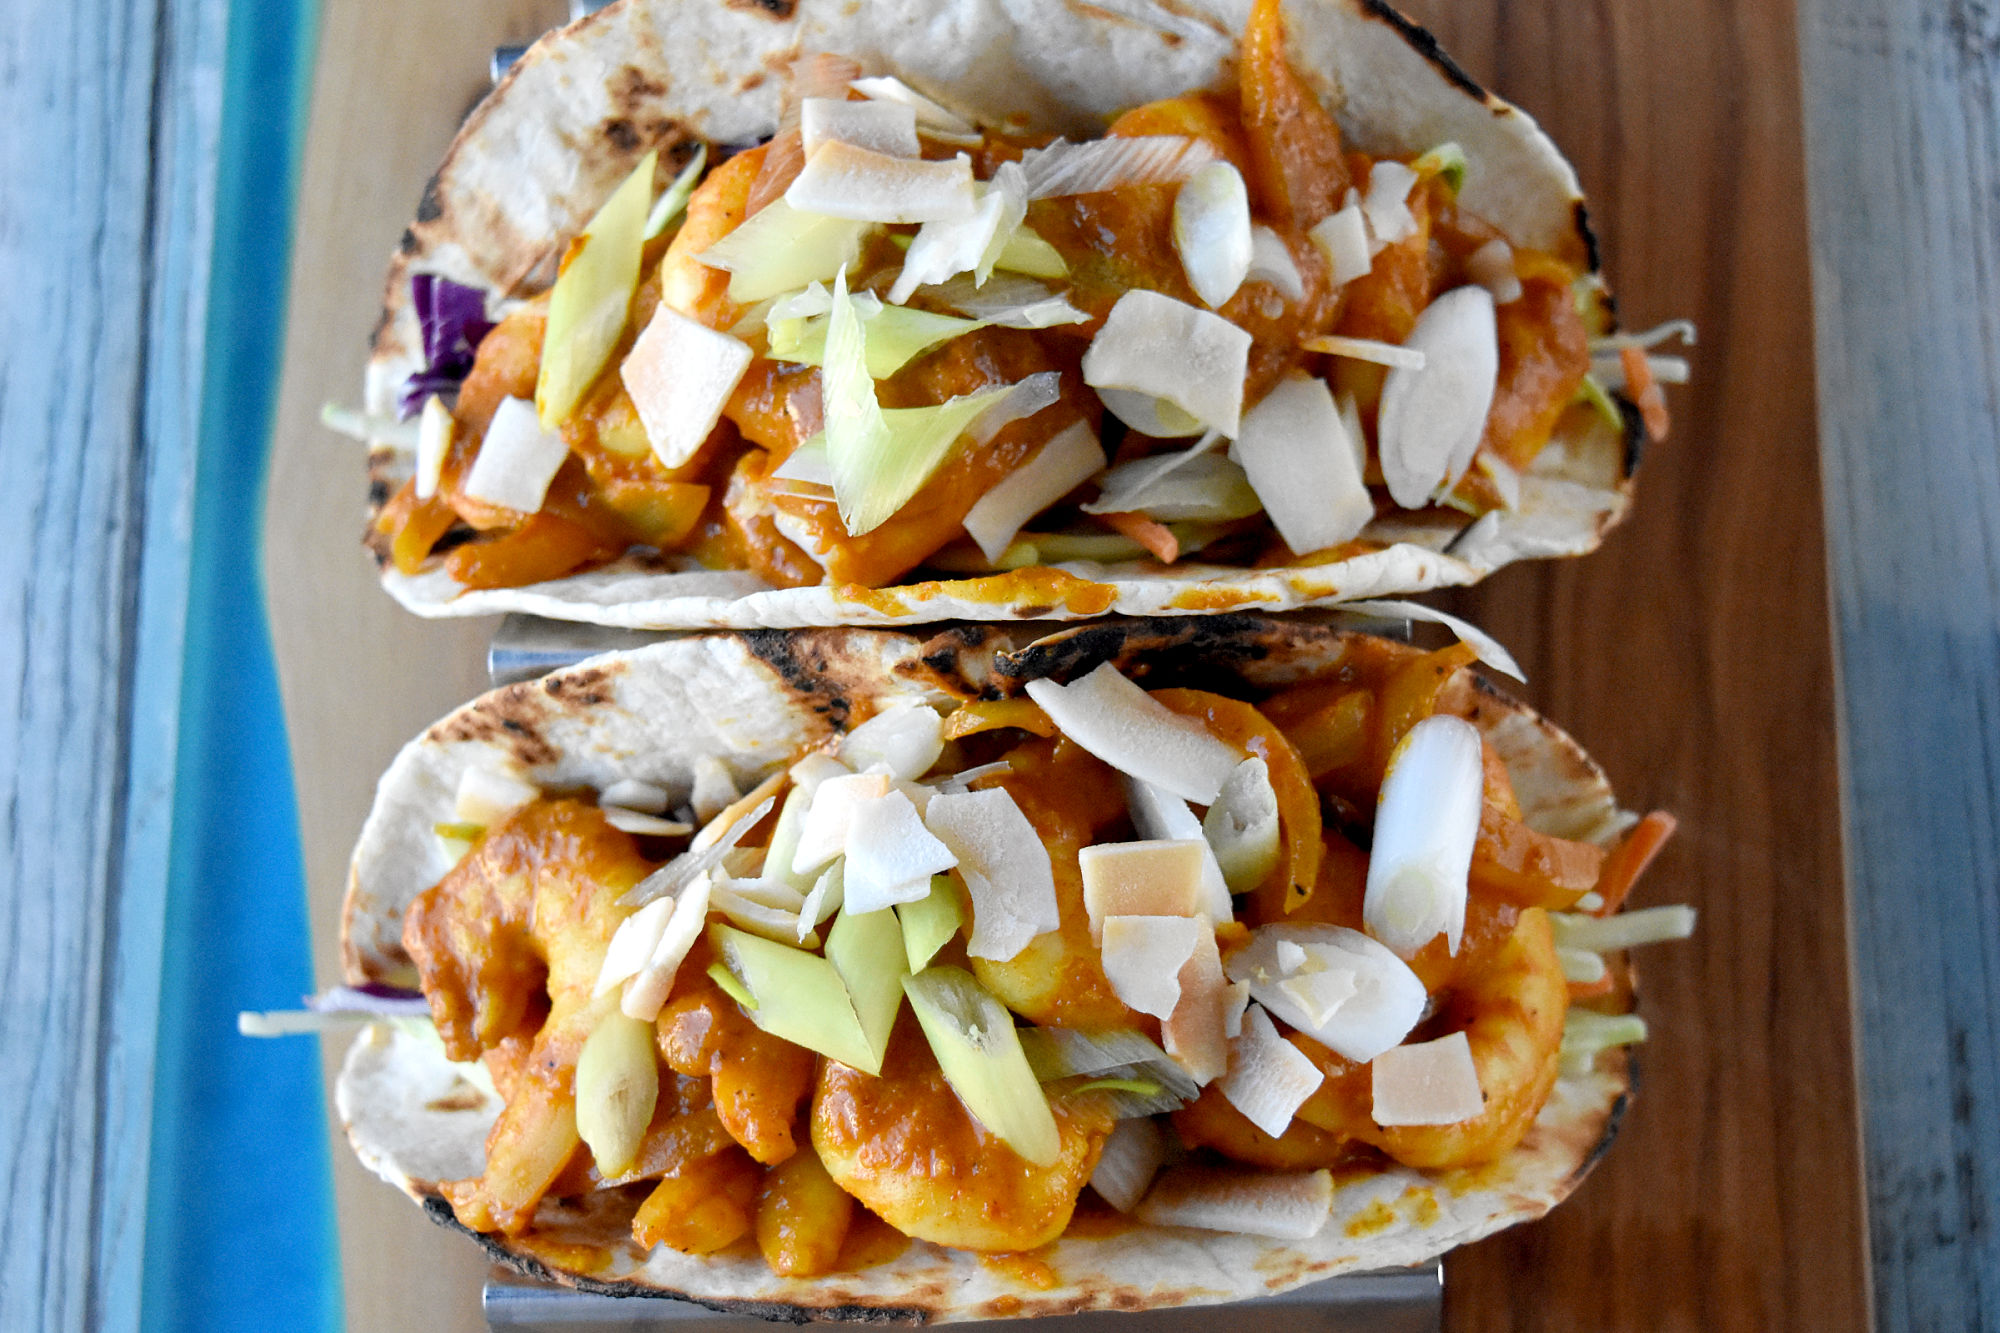 Curry Coconut Shrimp Tacos are succulent, rich, and full of curry flavor. They’re a fun twist on an Asian dish and perfect for #TacoTuesday! #OurFamilyTable #Thaicoconutcurry #coconutcurry #Thaicurry #currytacos #TacoTuesday
